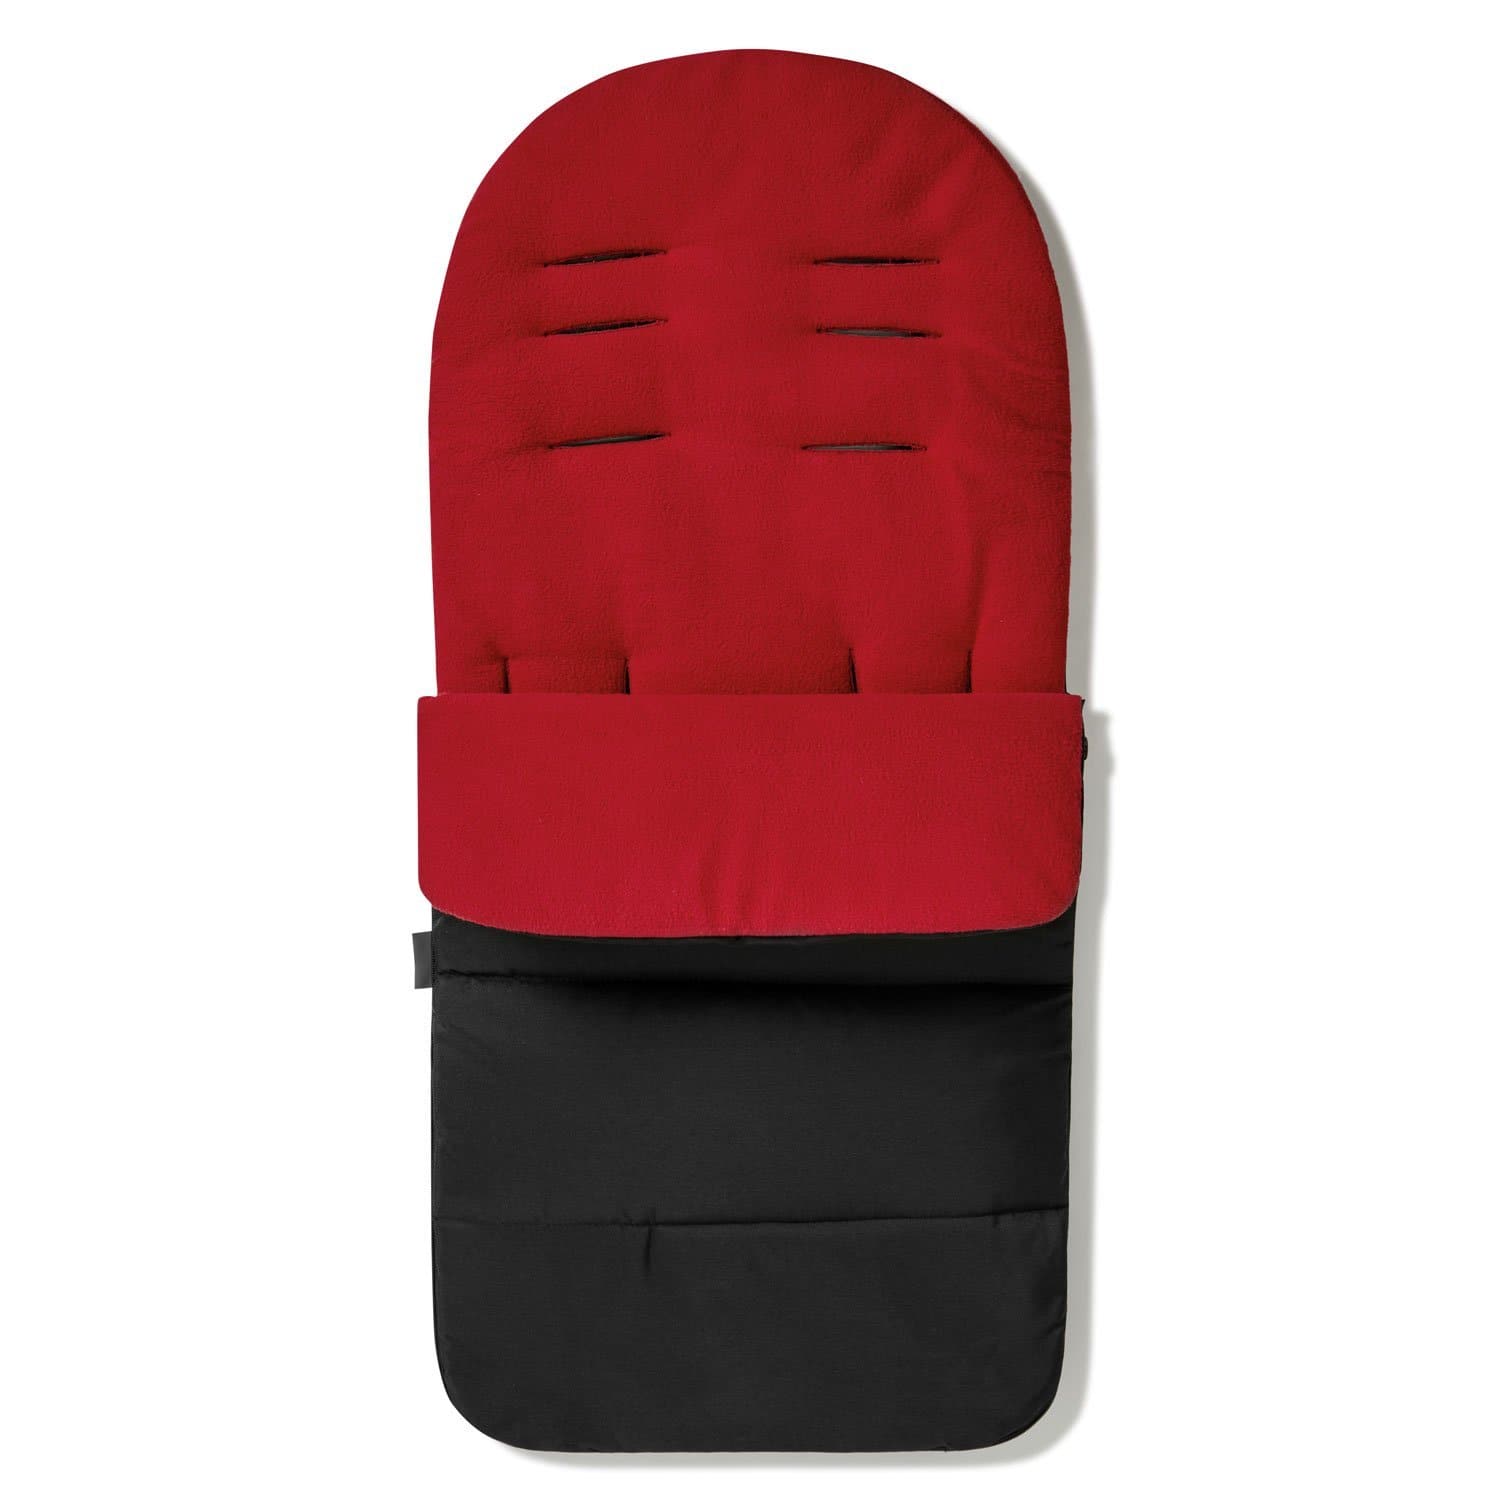 Premium Footmuff / Cosy Toes Compatible with Graco - Fire Red / Fits All Models | For Your Little One